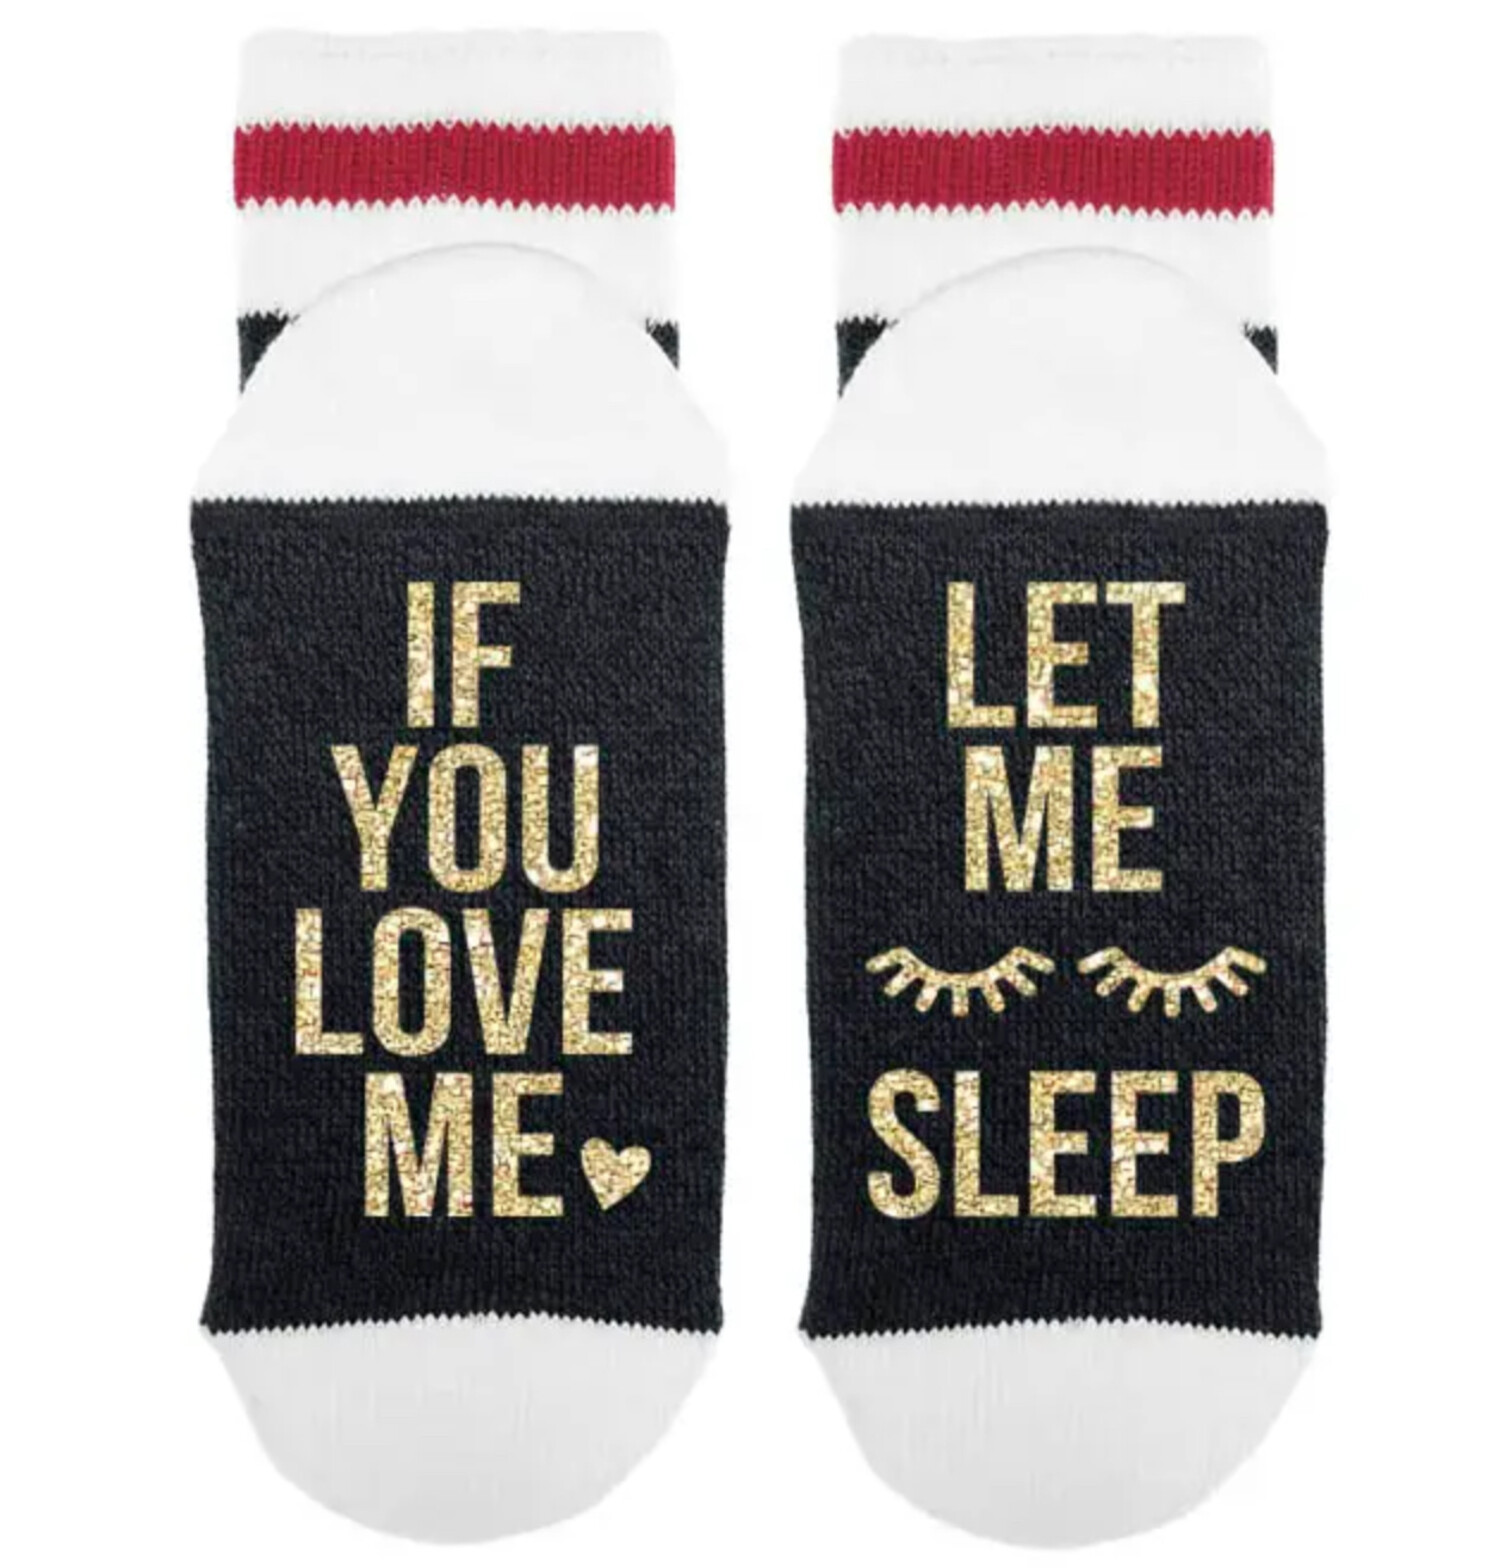 Funny Socks, Bottom of Sock Sayings, If you can read this, I